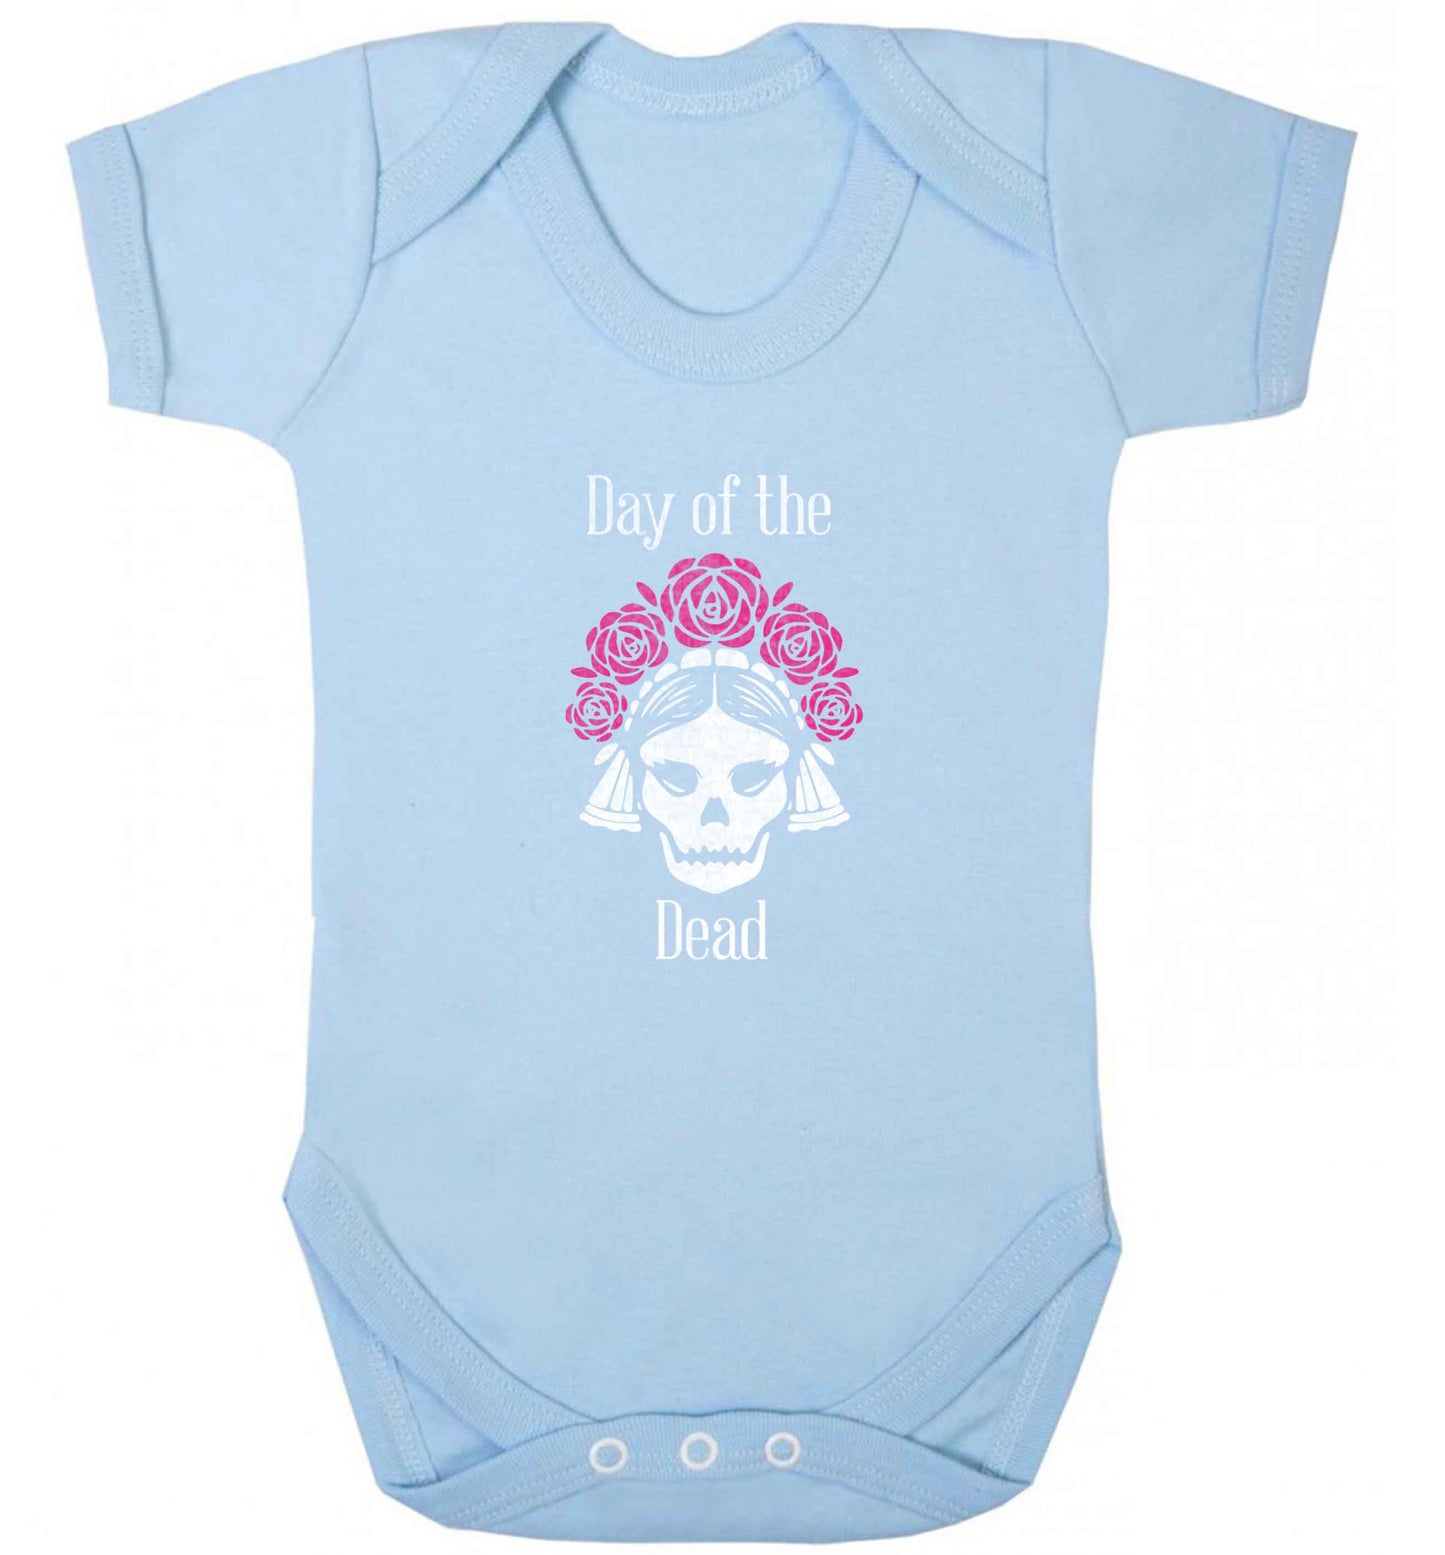 Day of the dead baby vest pale blue 18-24 months